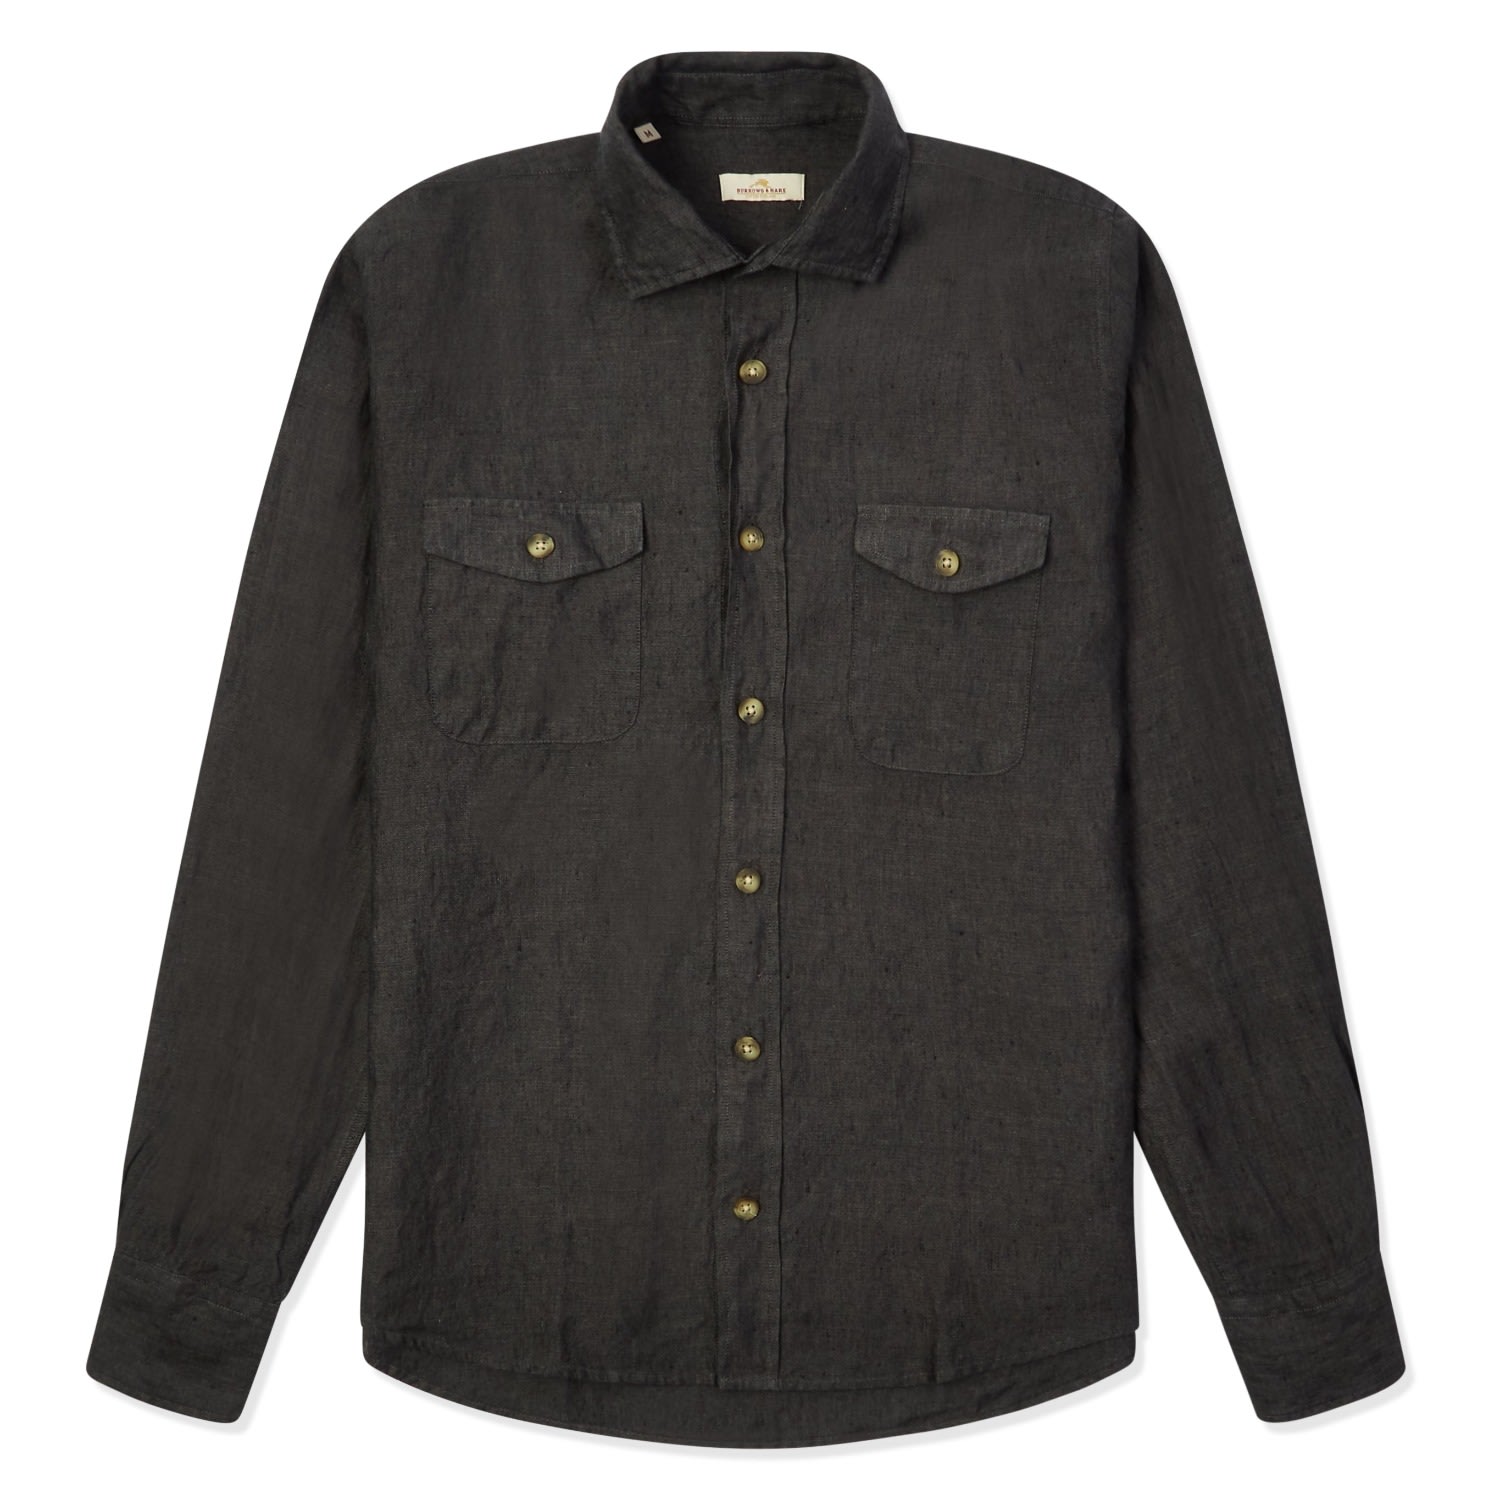 Burrows And Hare Men's Black Linen Pockets Shirt - Charcoal